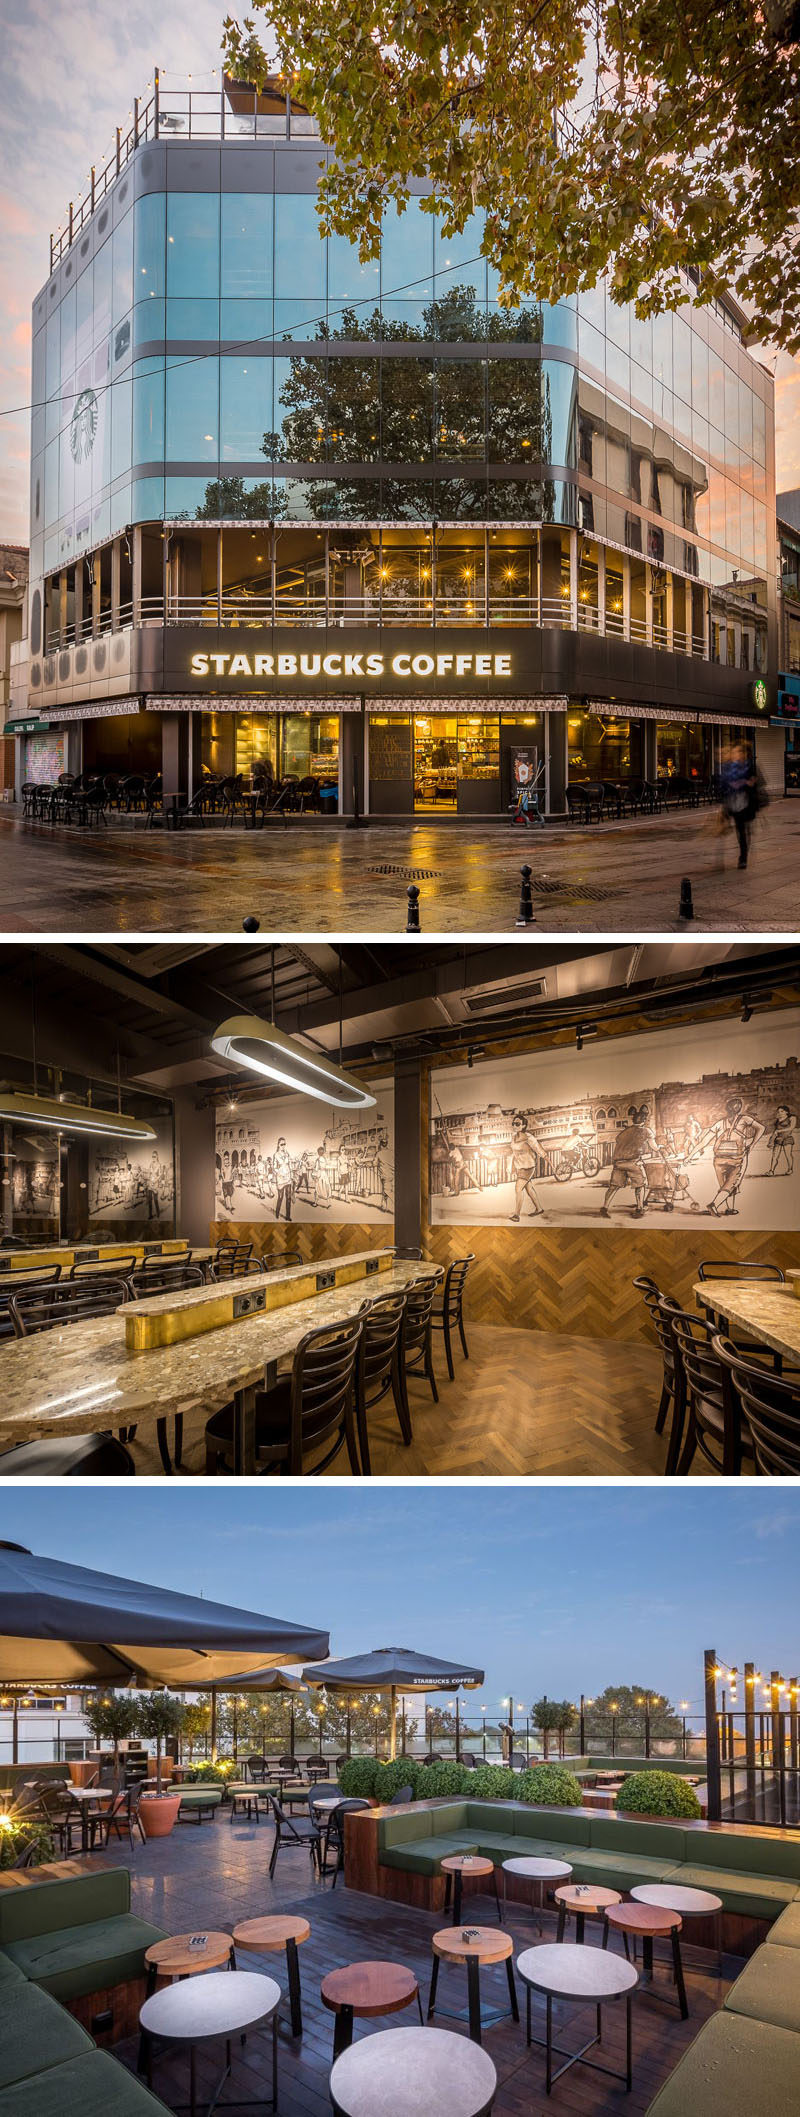 11 Starbucks Coffee Shops From Around The World // The four level location features a rooftop patio that looks out over Istanbul’s Bosphorus Strait, and tall windows to allow those sitting inside to enjoy the views of the water and surrounding city.